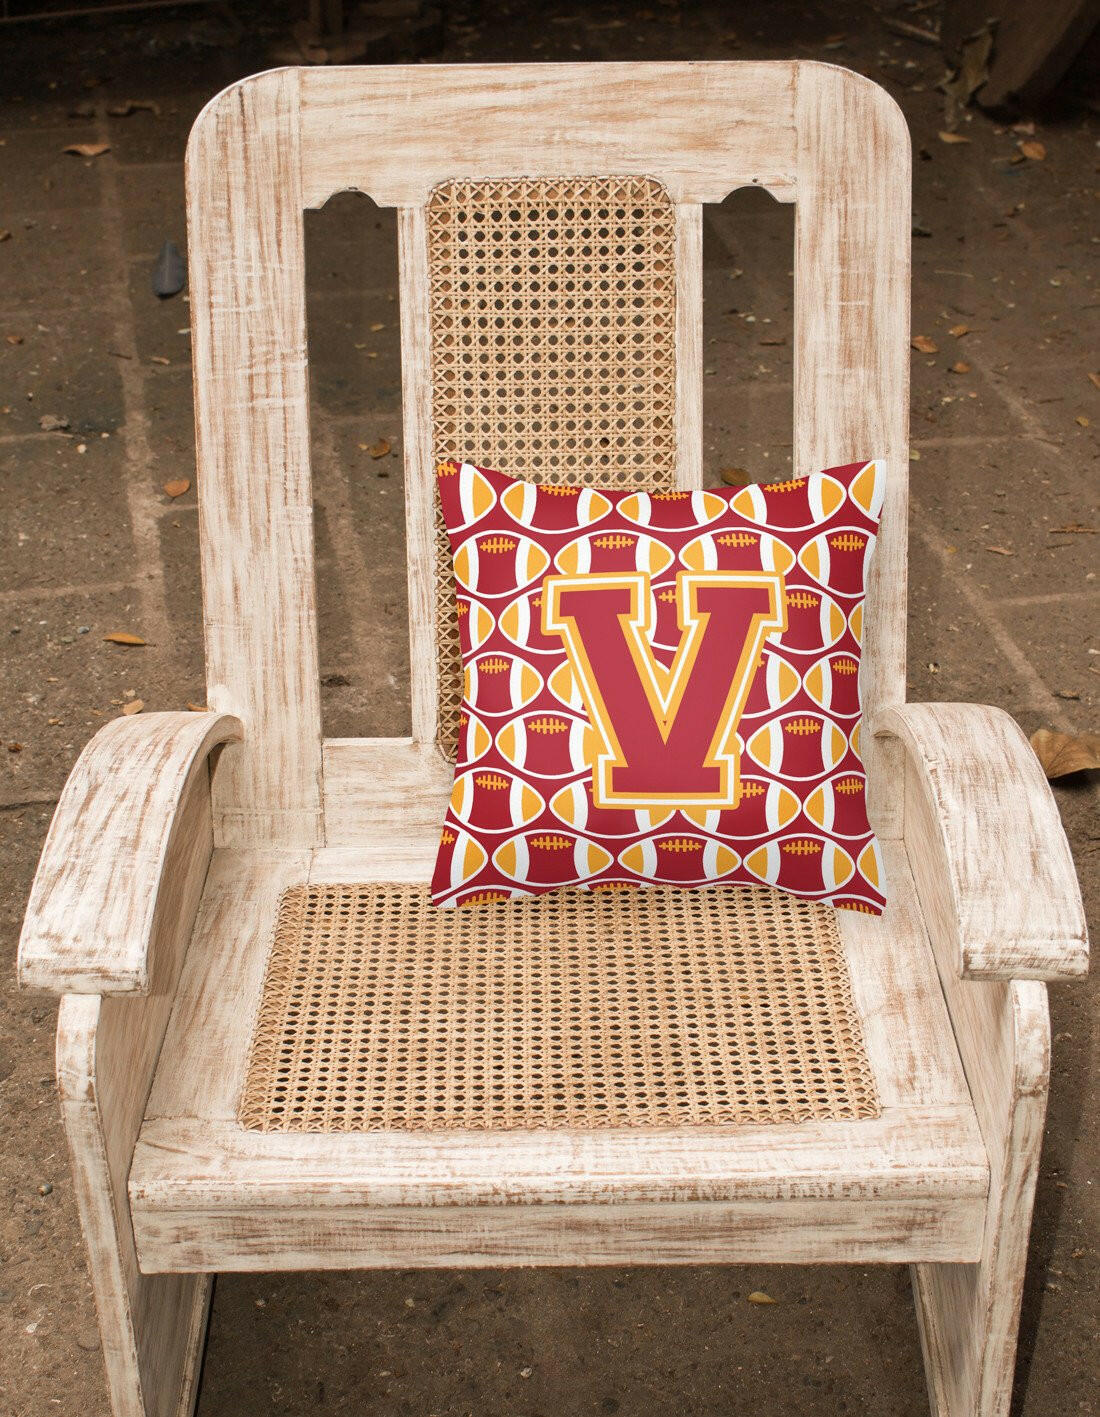 Letter V Football Cardinal and Gold Fabric Decorative Pillow CJ1070-VPW1414 by Caroline's Treasures